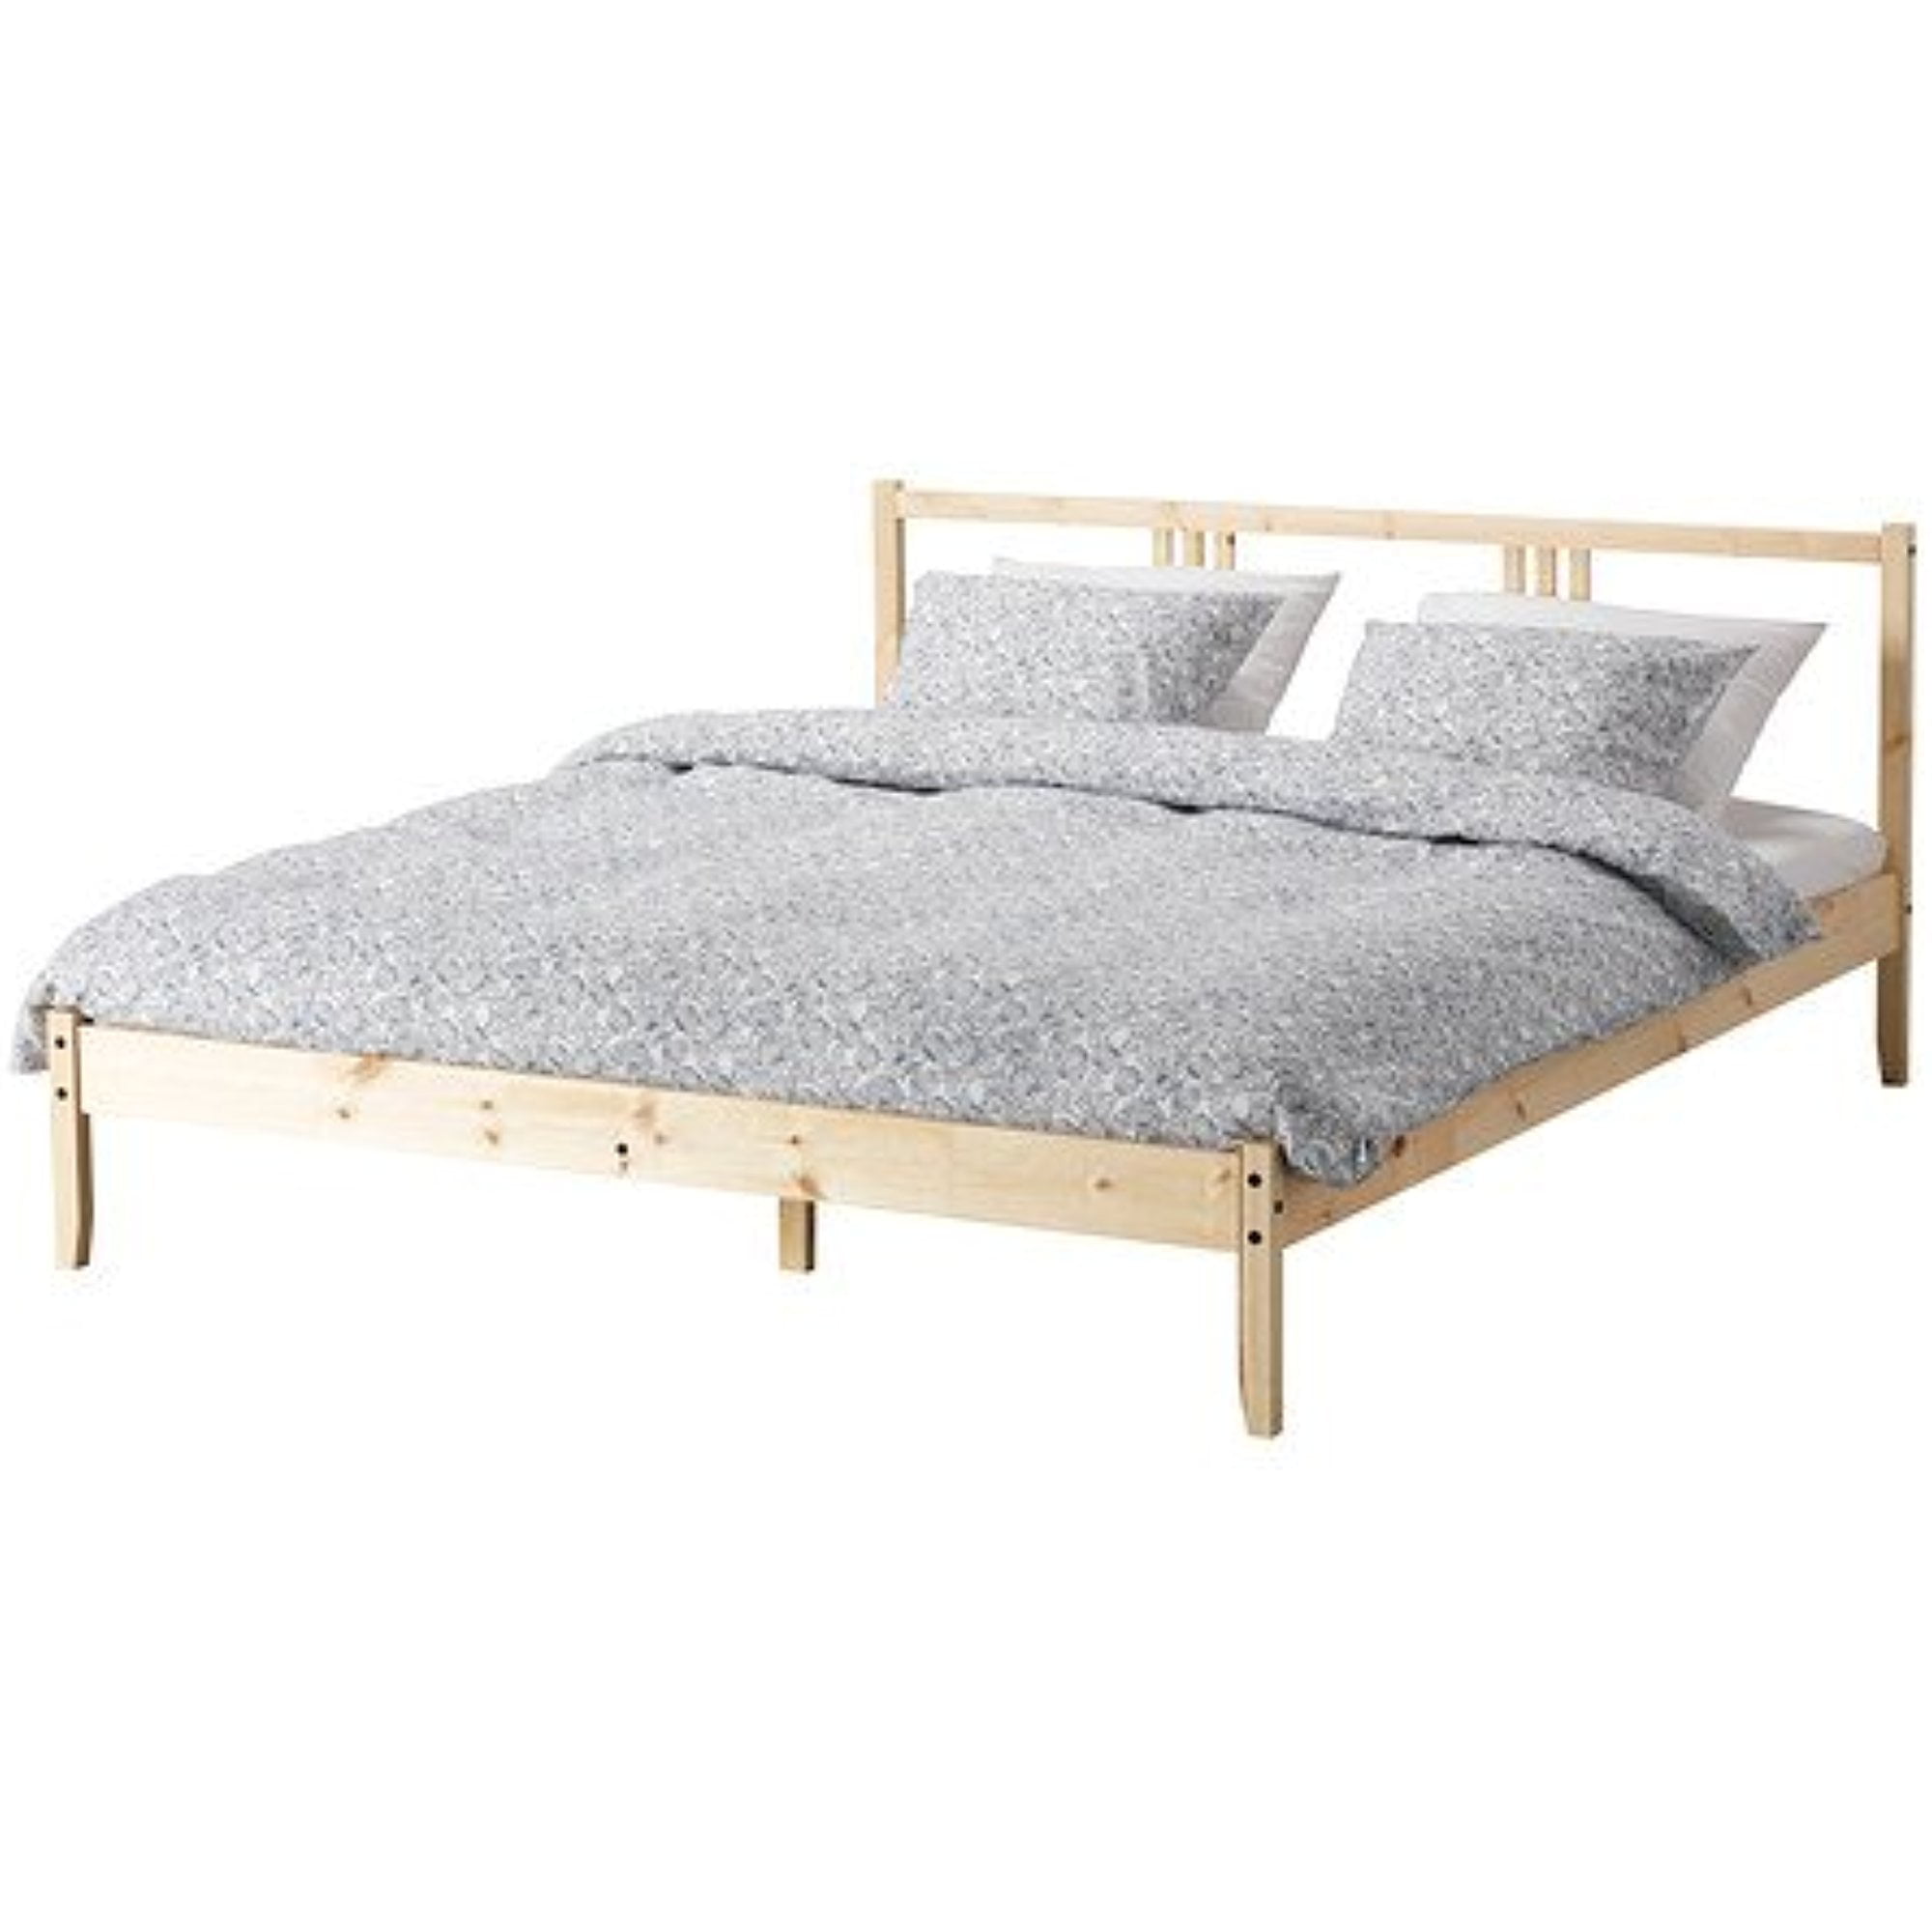 Ikea Full Bed Frame Solid Wood With, Ikea Cal King Bed Frame